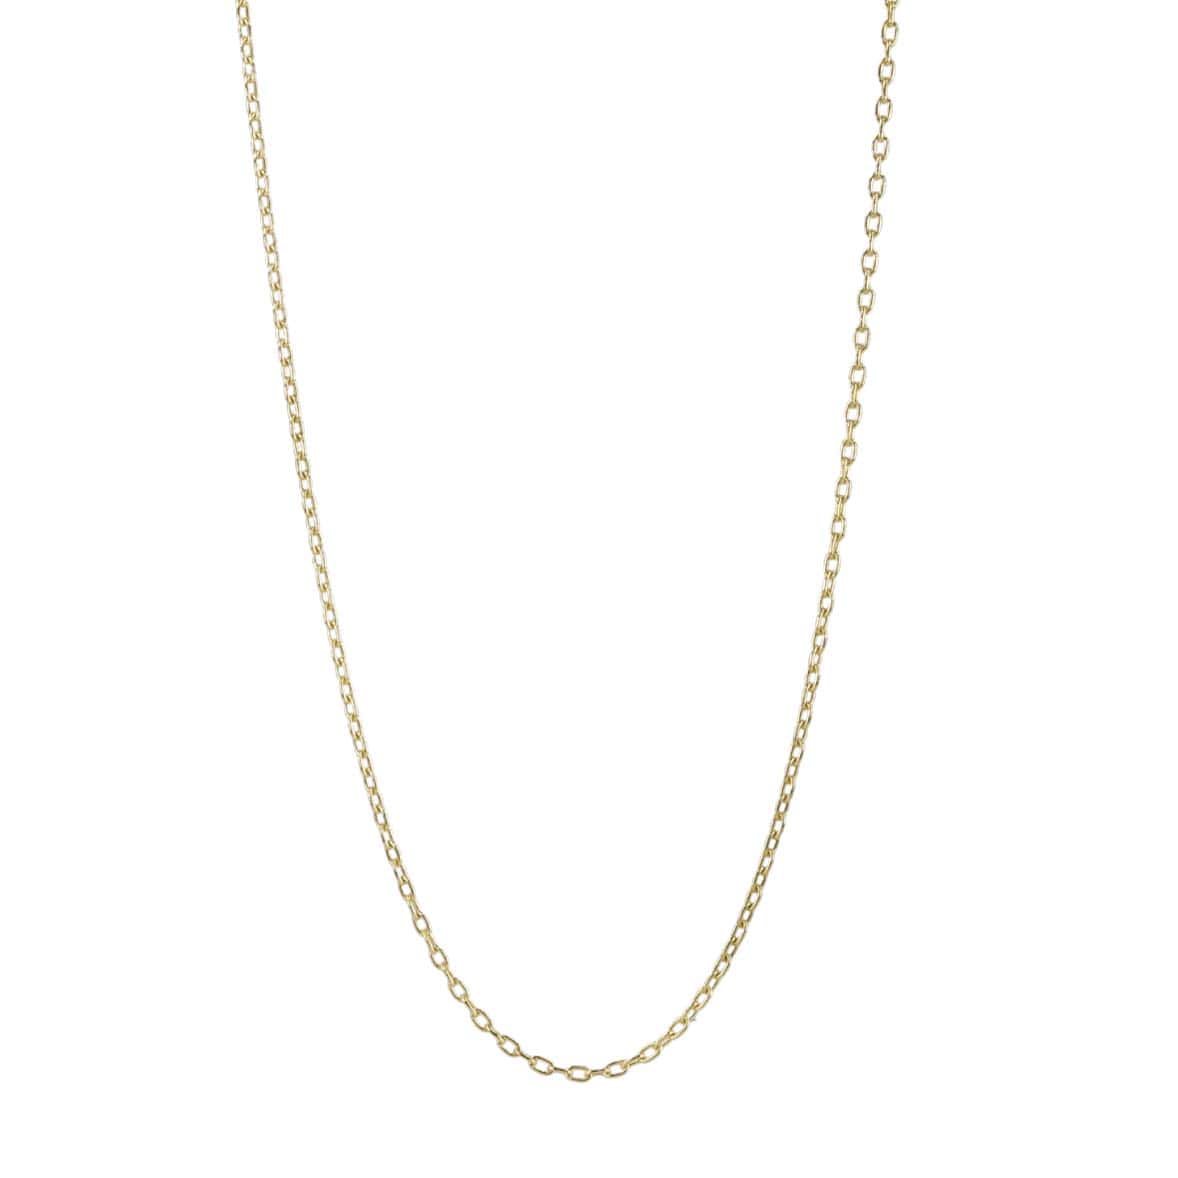 14 Karat Gold Cable Link Chain with S-Hook Closure - Peridot Fine Jewelry - Rosanne Pugliese